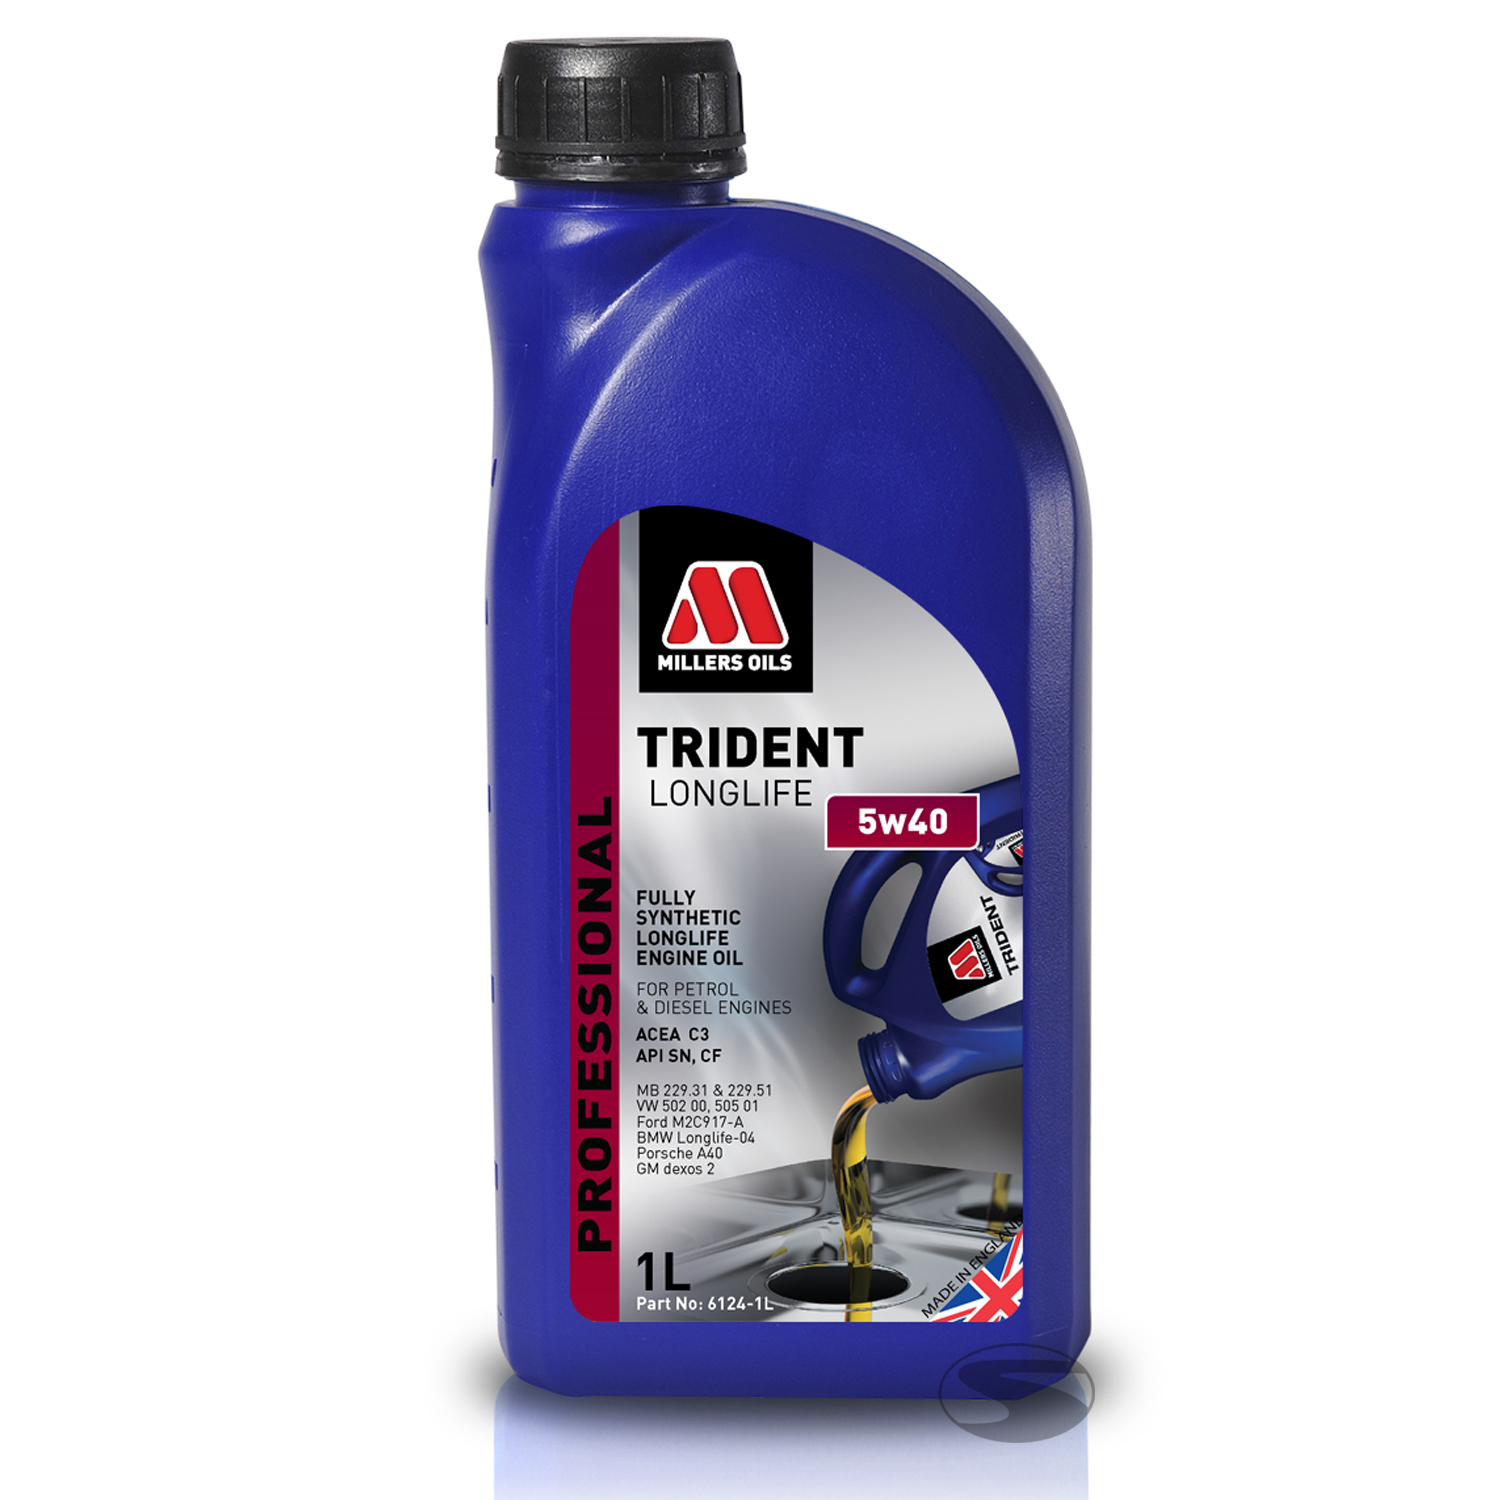 Millers Oils Trident Longlife 5W40 Full Synthetic_1 Liter_150194